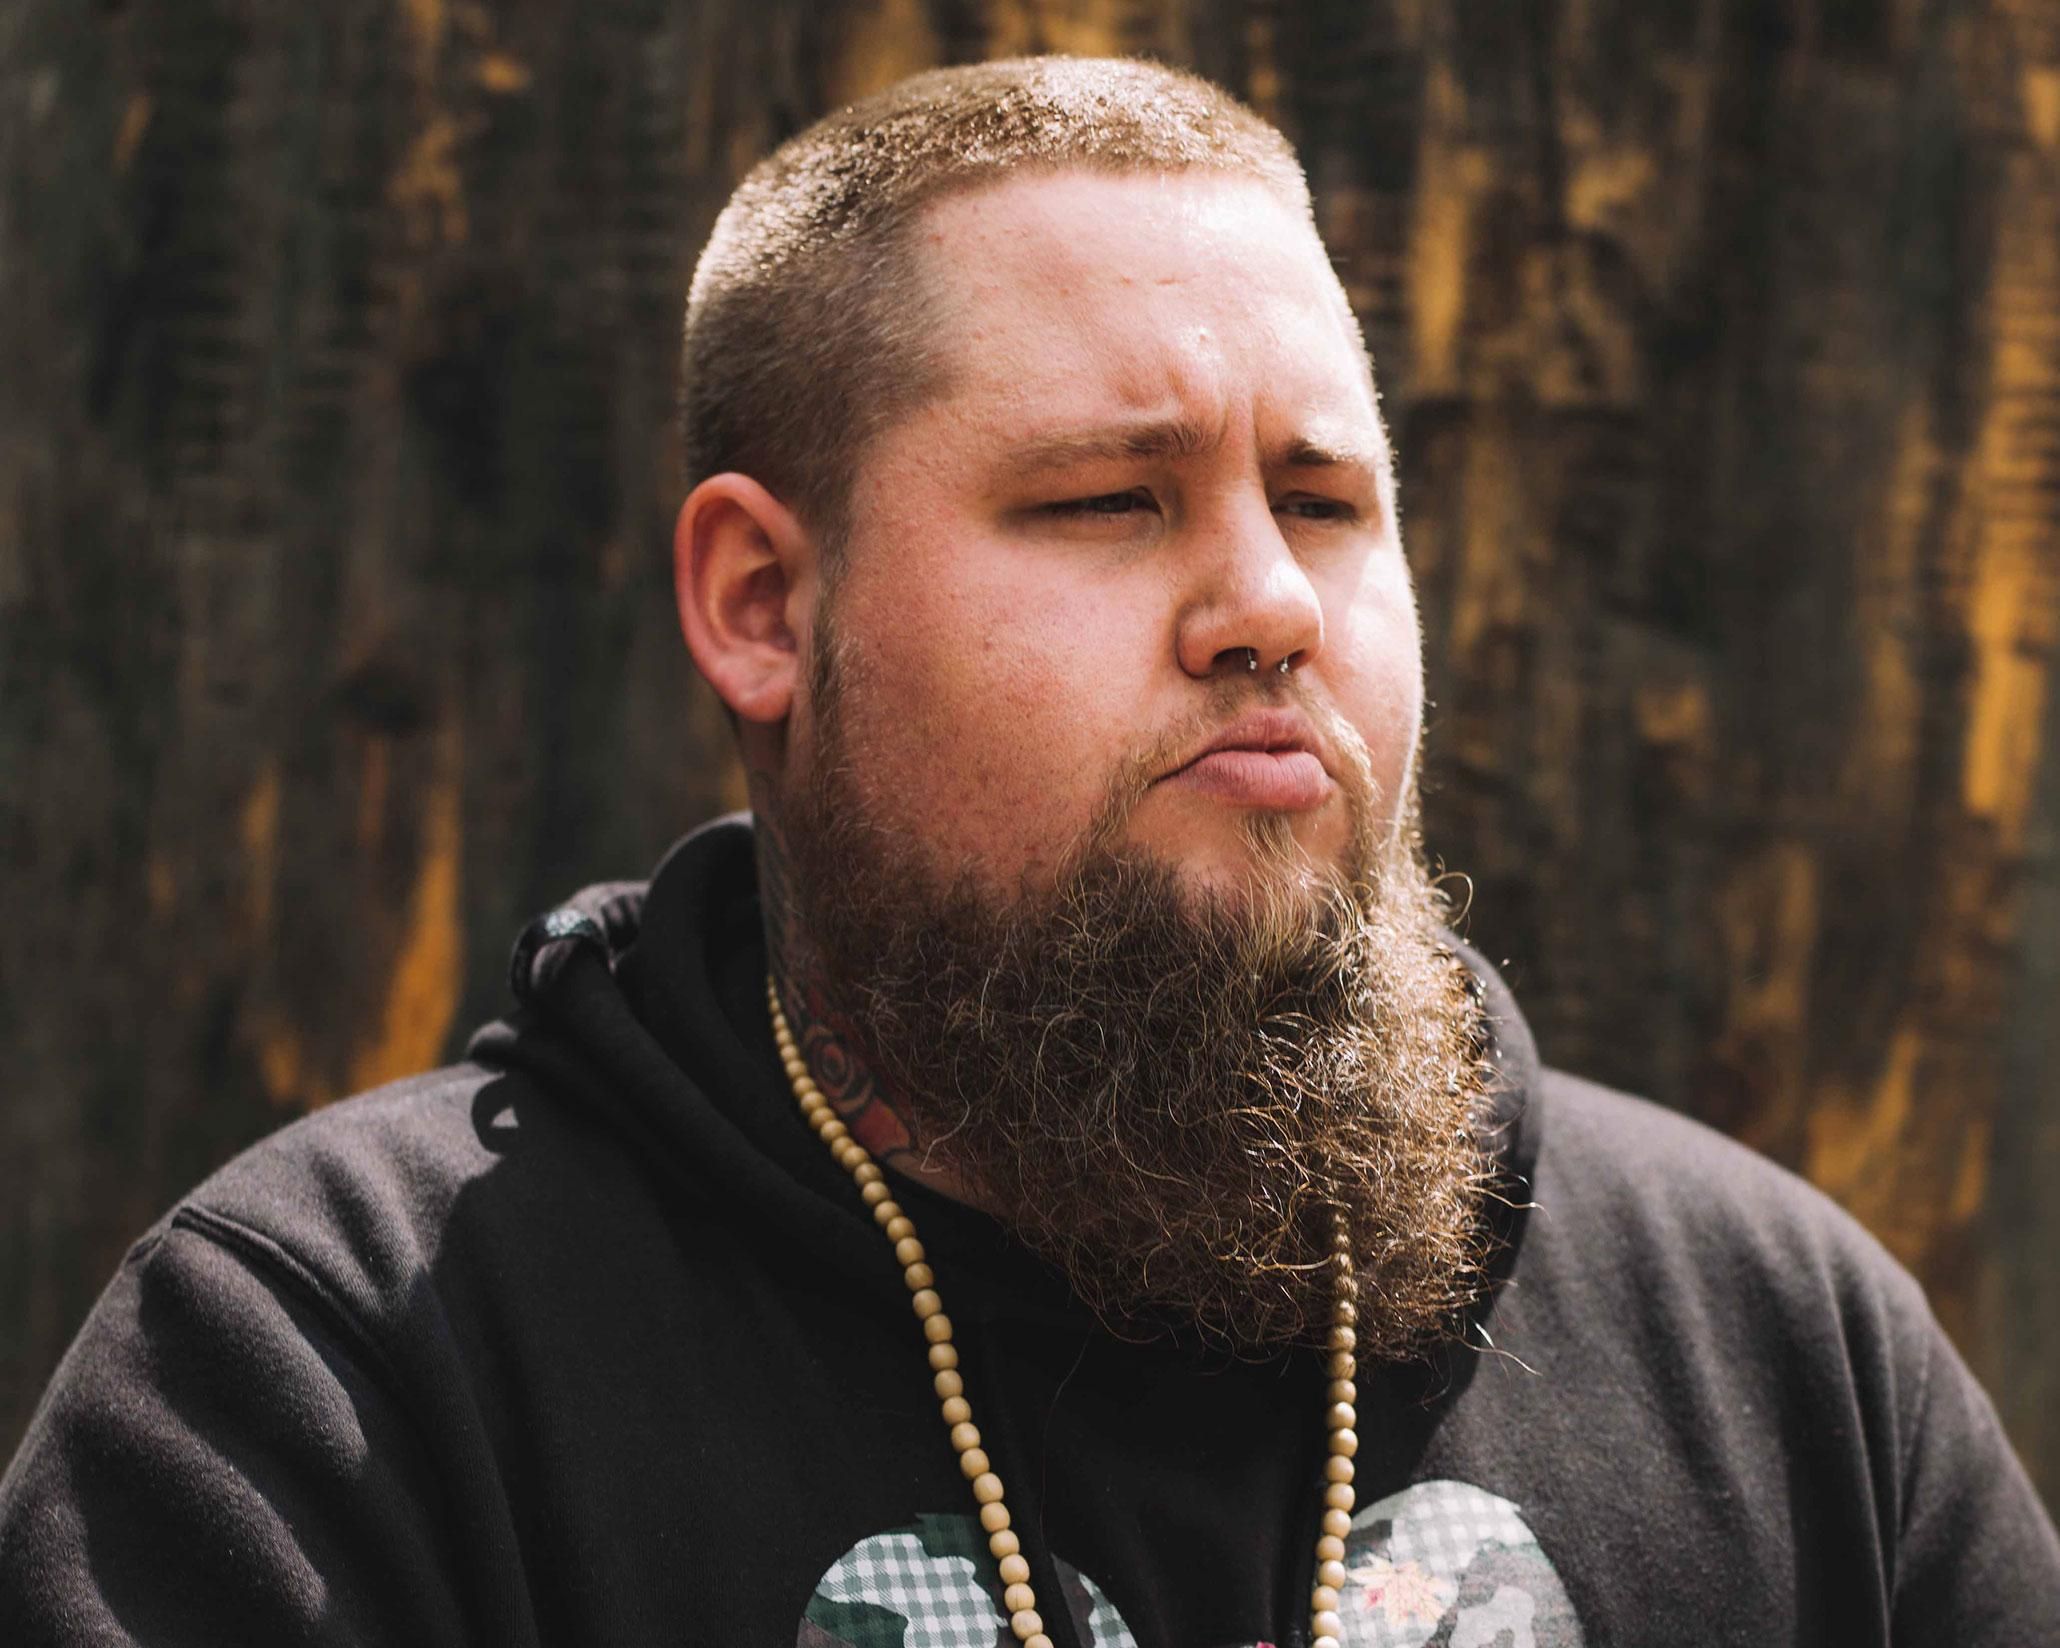 Rag'n'Bone Man - 20 Greatest Hits, Grandes Éxitos Giant, Guilty, All You  Ever Wanted, Human, Skin 